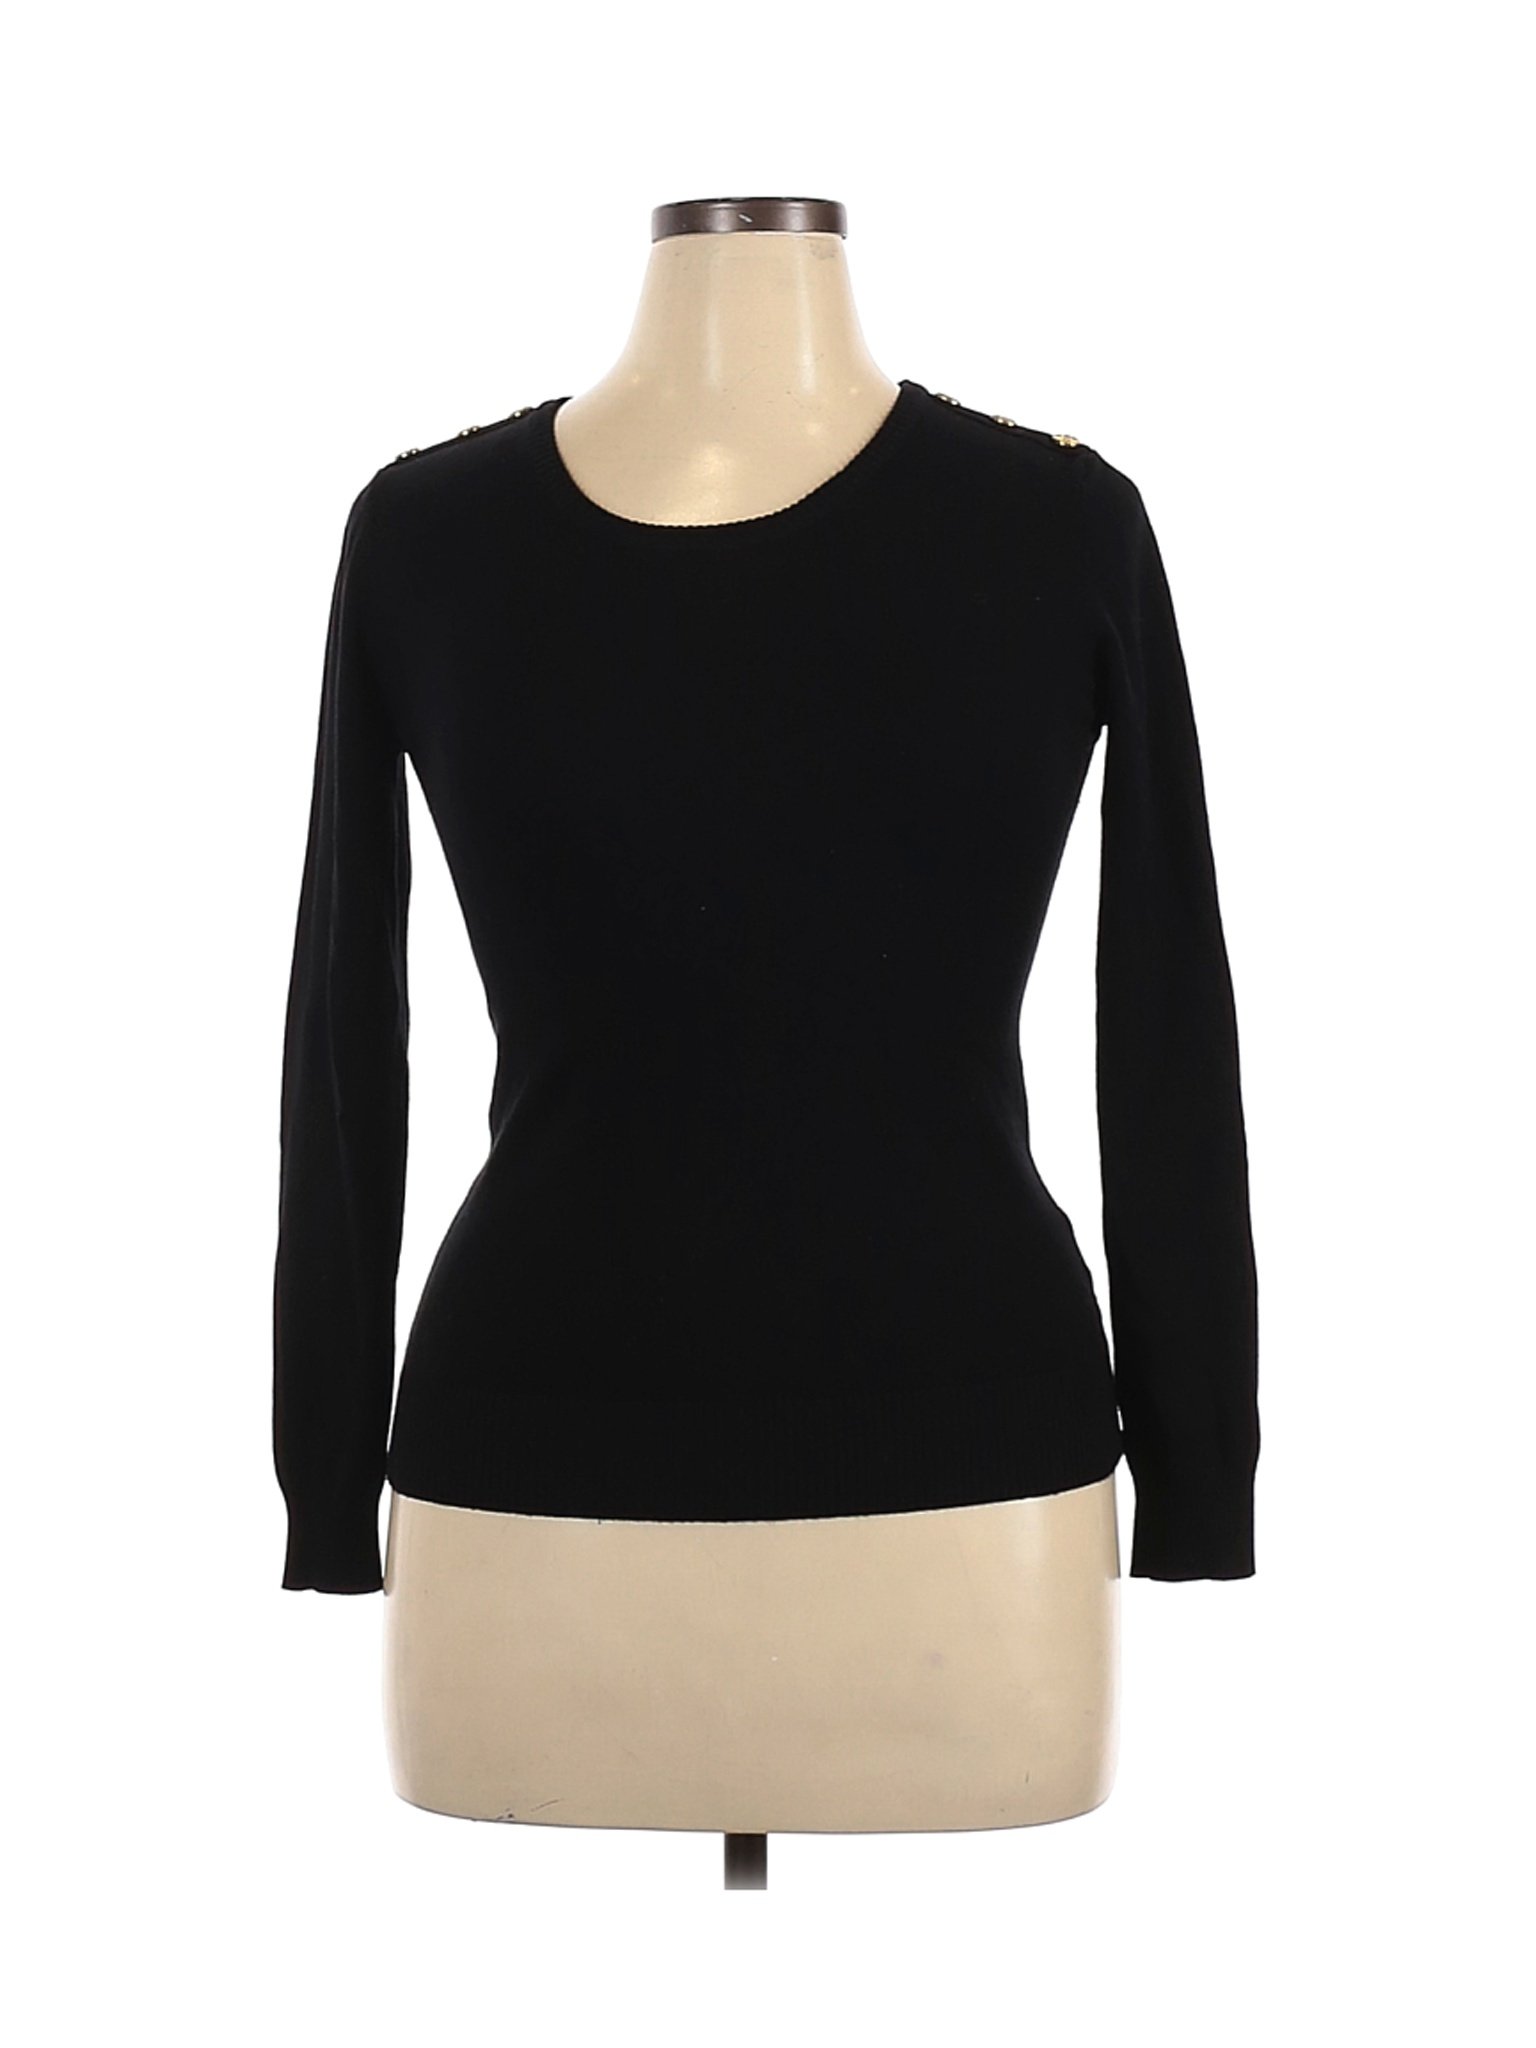 Cielo Solid Black Pullover Sweater Size XL - 75% off | thredUP